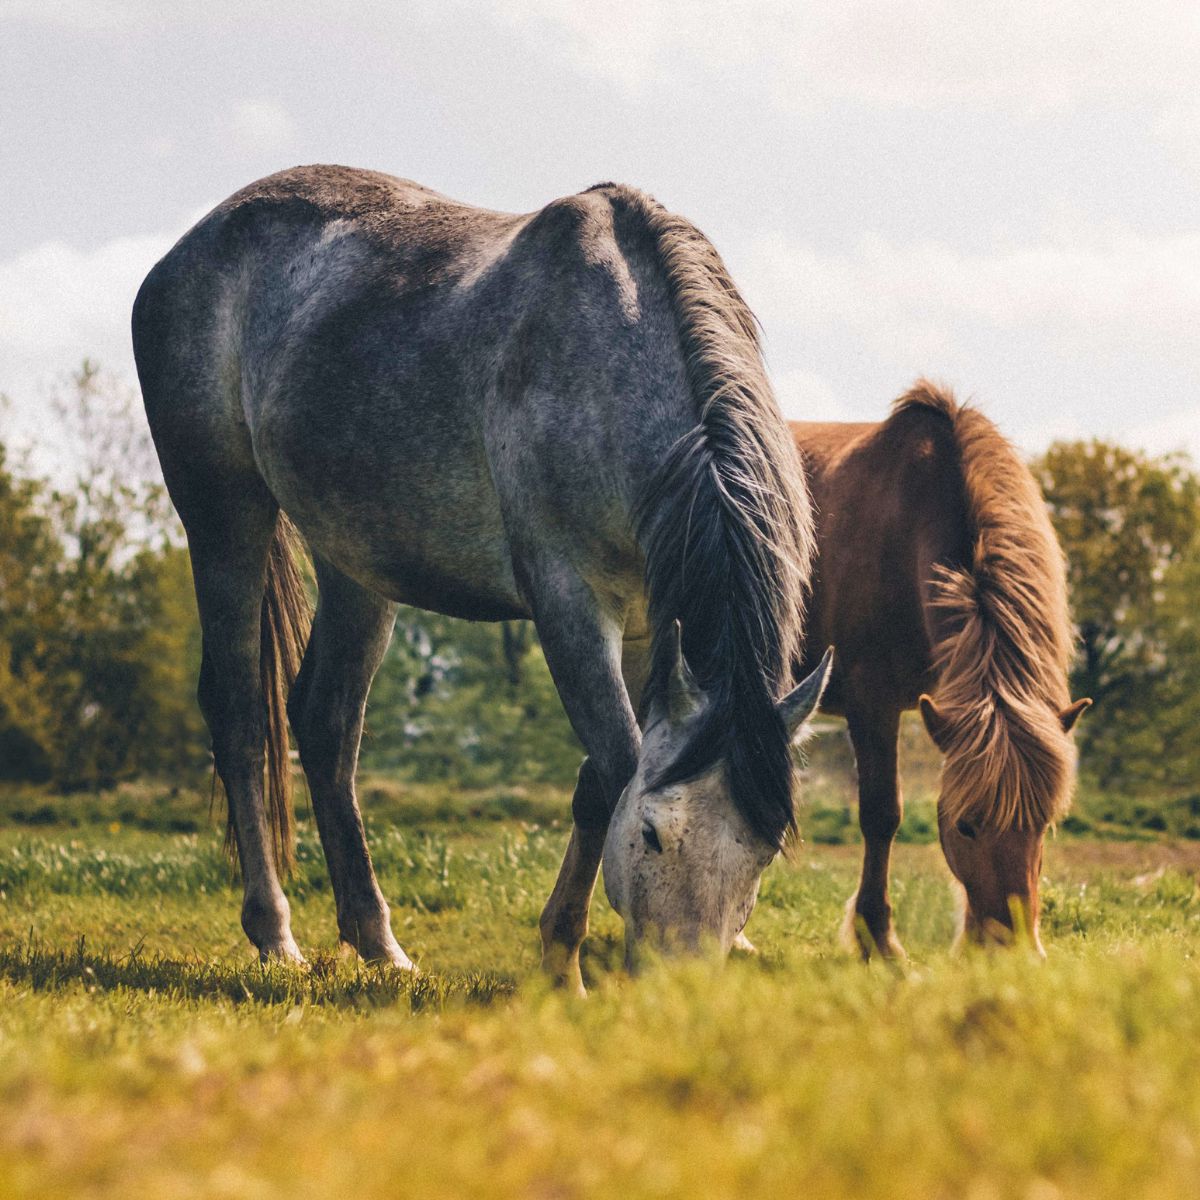 two horses eating grass in a field